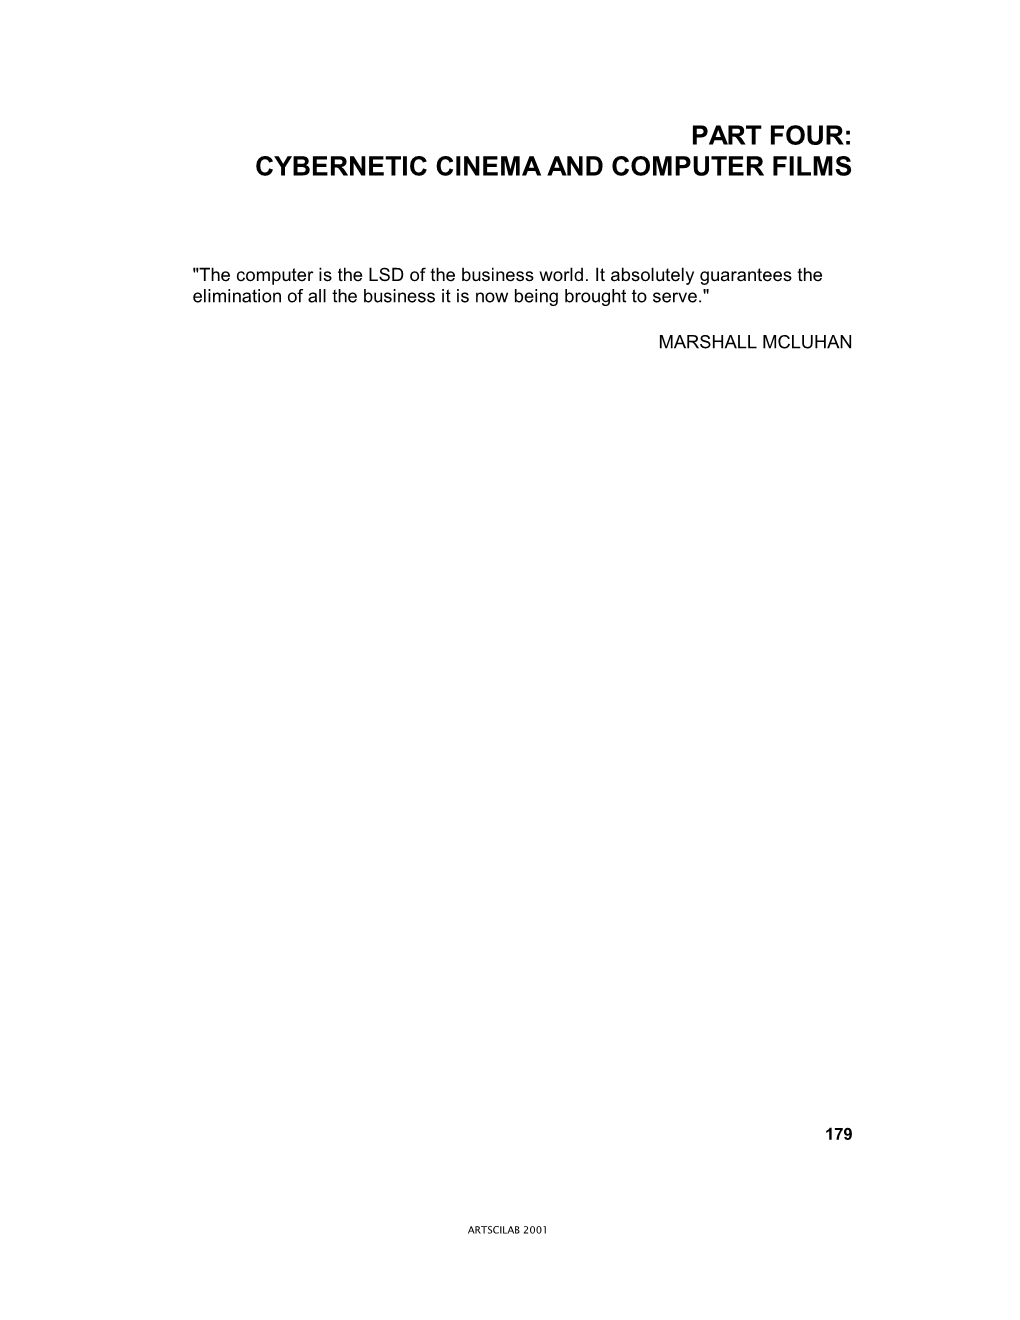 Part Four: Cybernetic Cinema and Computer Films